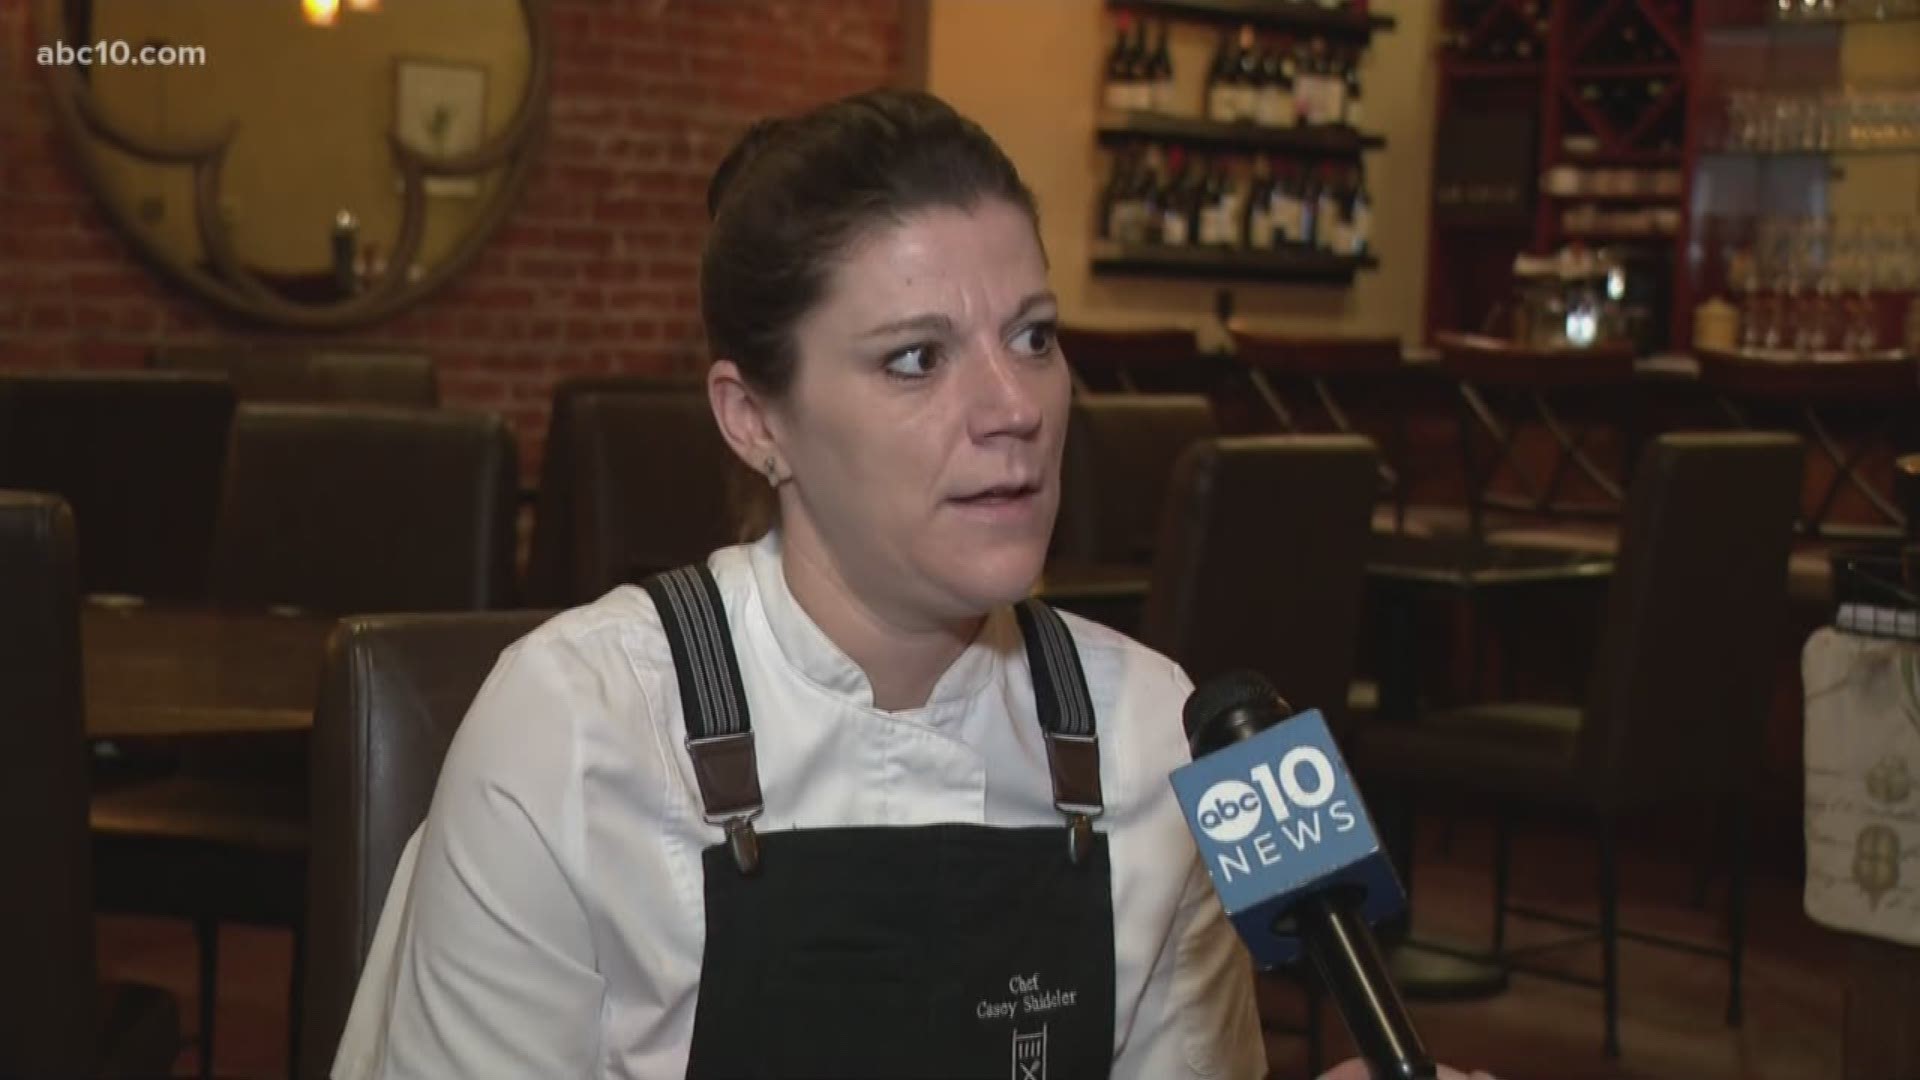 Chef Casey Shideler, formerly of Taylor’s Kitchen and now the new BAWK! restaurant on R Street, spoke with ABC10 about the upcoming Farm to Fork Bridge Dinner.